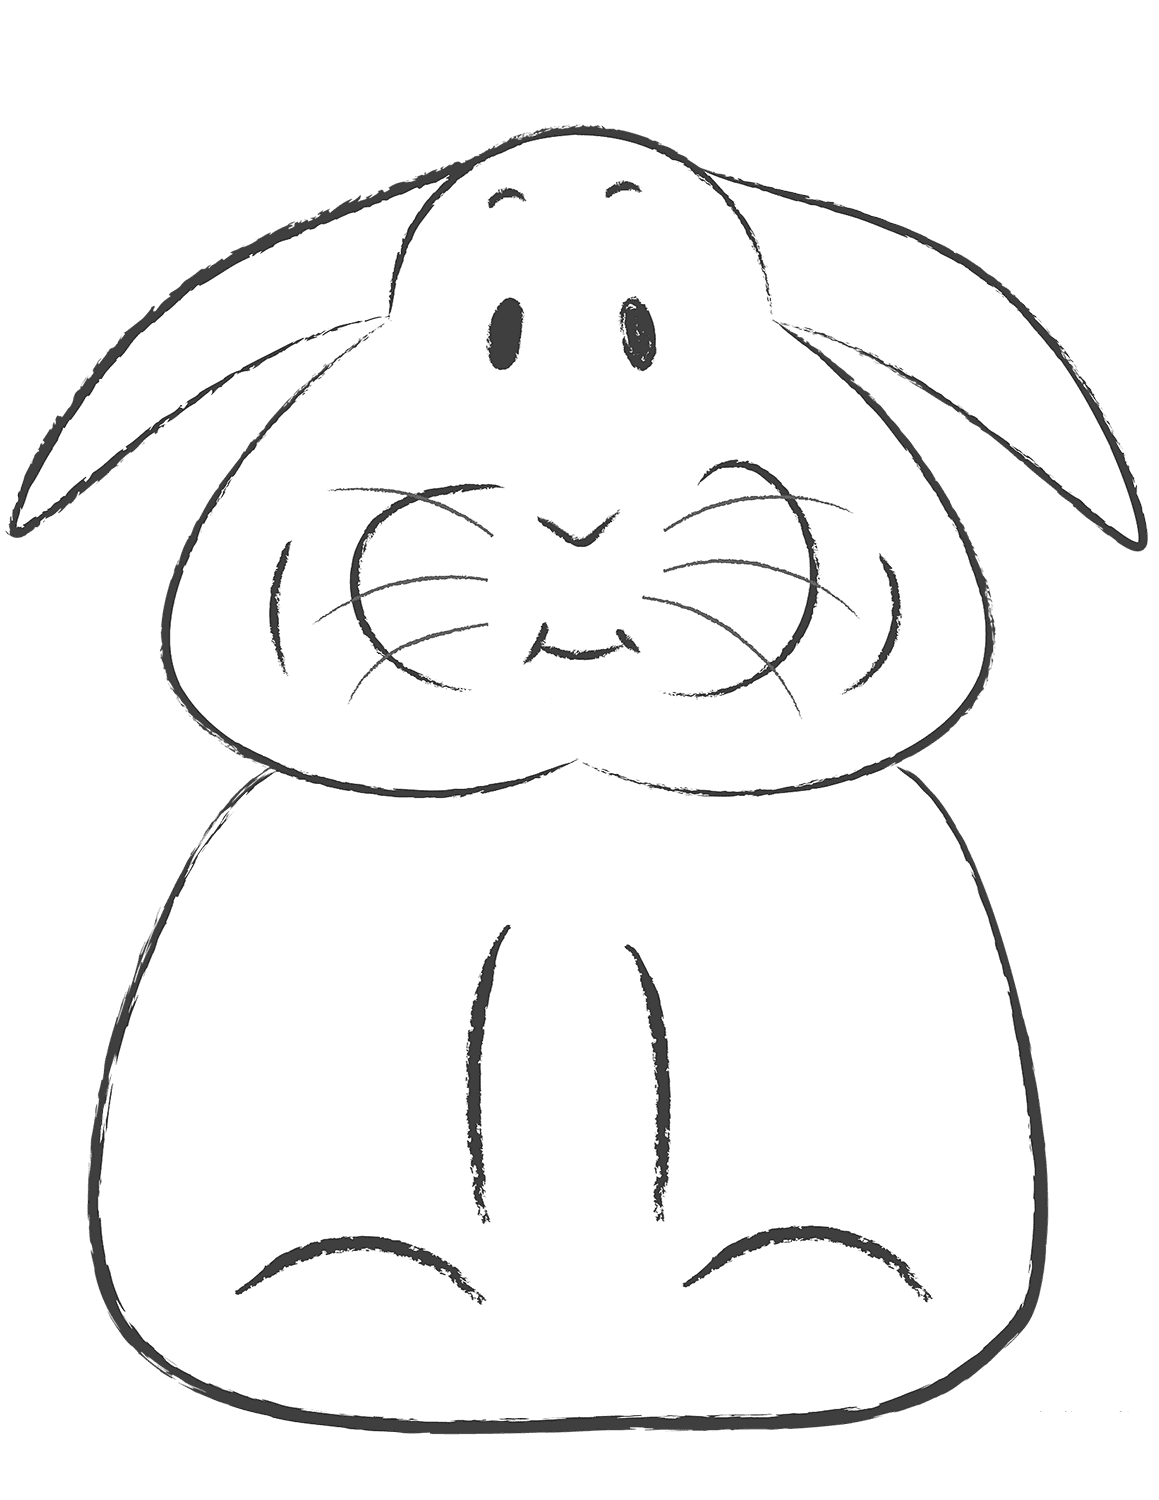 How To Draw Funny Old Bunny Coloring Pages